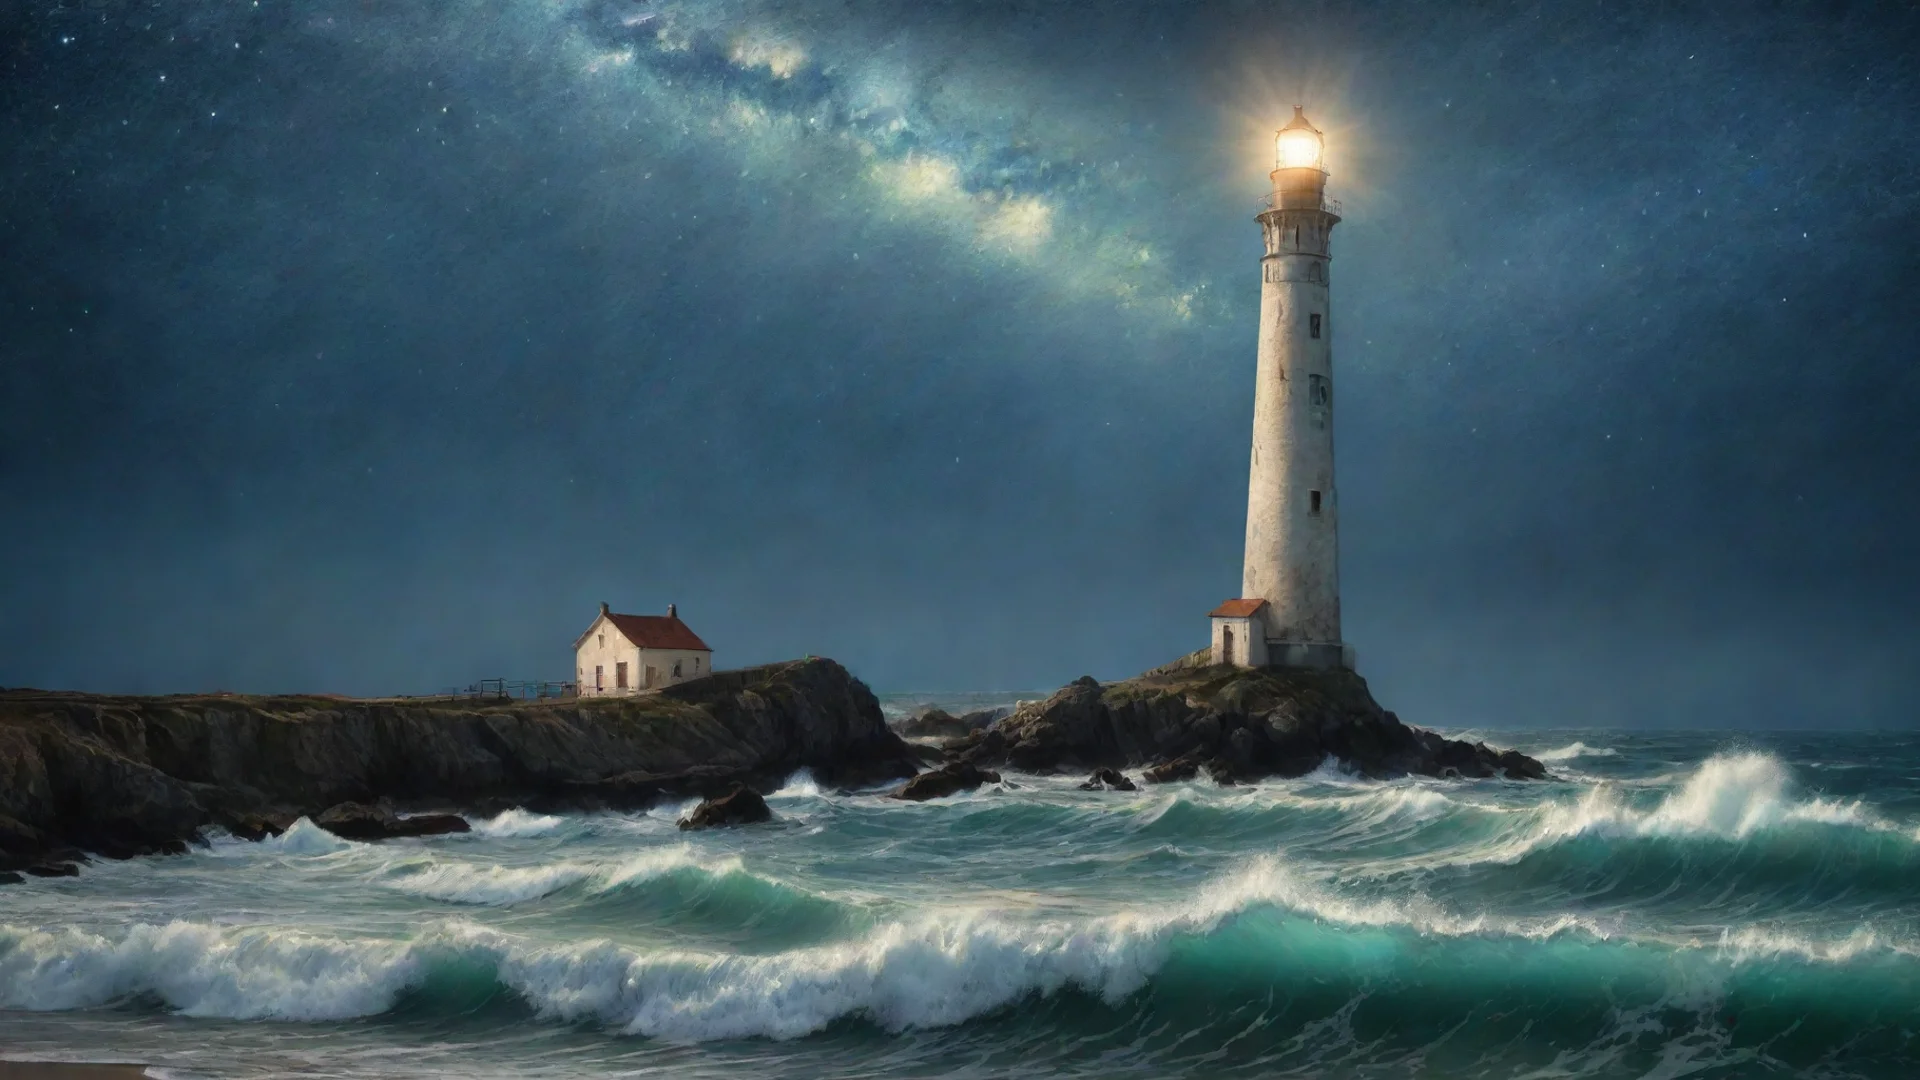 aiamazing dreamy lighthouse  dramatic lighting van gogh starry night magical atmosphere by renato muccillo a awesome portrait 2 wide